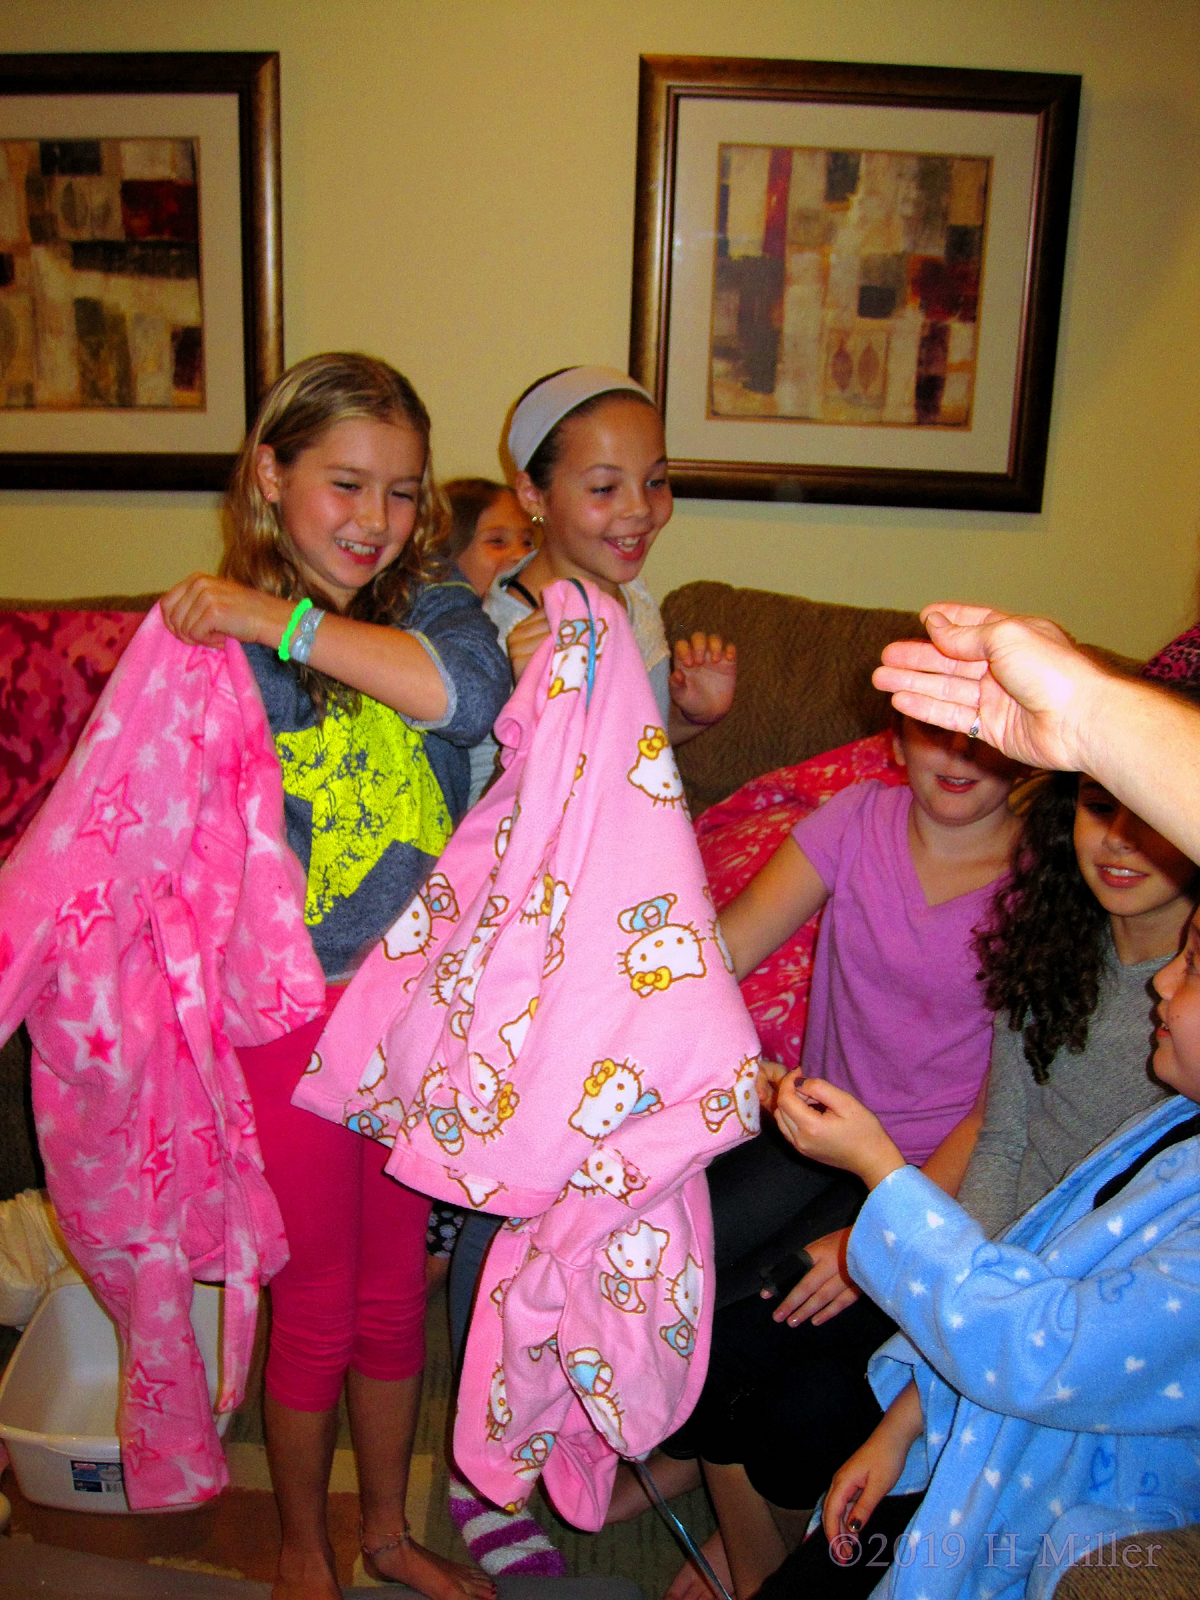 Spa Party Guests Getting Cozy In Kids Spa Robes! 